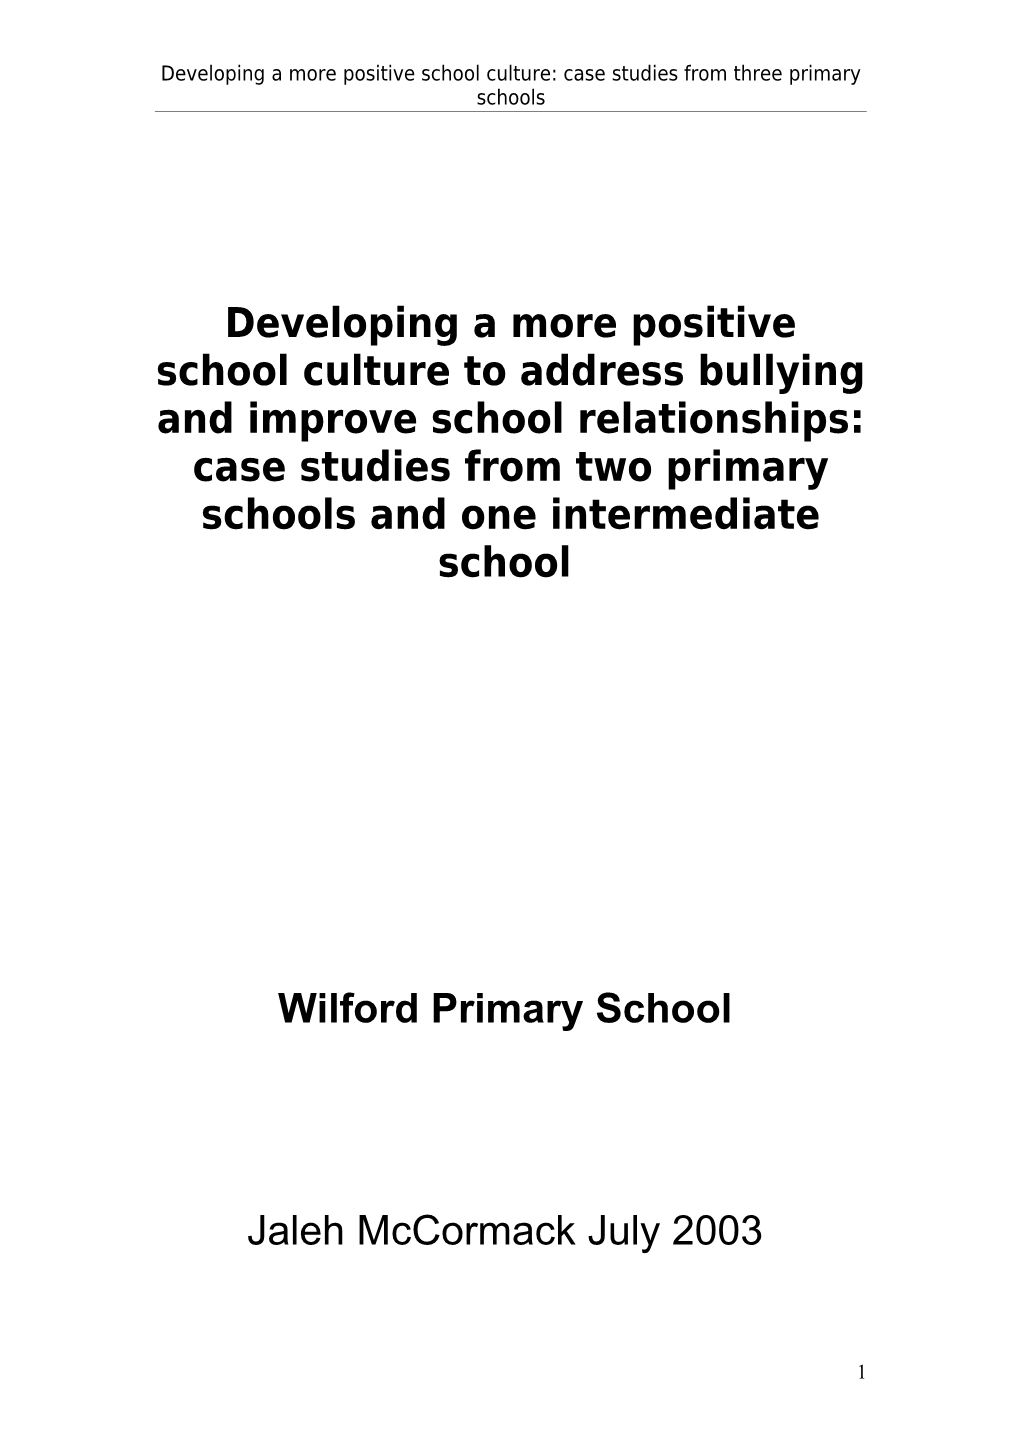 Developing a More Positive School Culture: Case Studies from Three Primary Schools